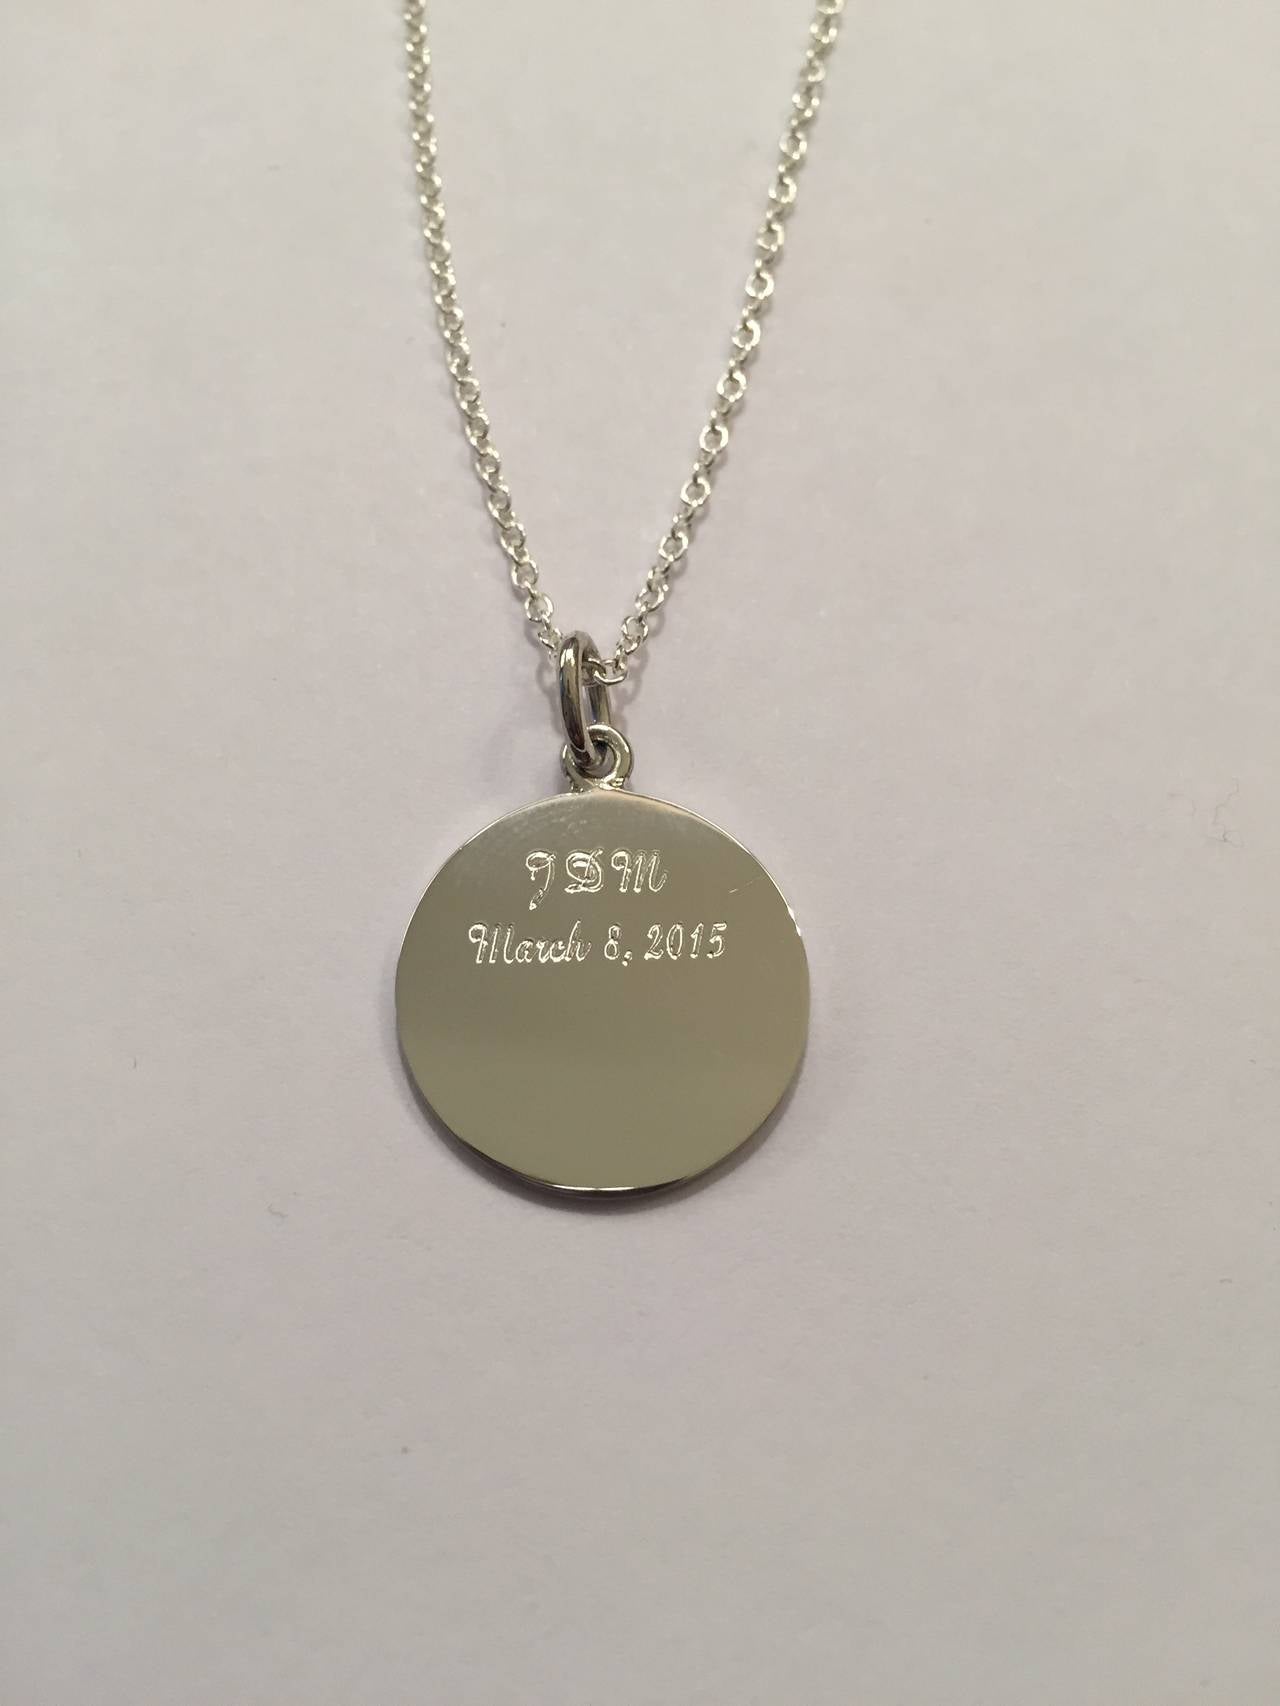 Personalized Silver First Communion Pendant Necklace.  We laser engrave your church or school logo on the front and then engrave your child's initials or monogram in the back with the date of the first communion.

3/4